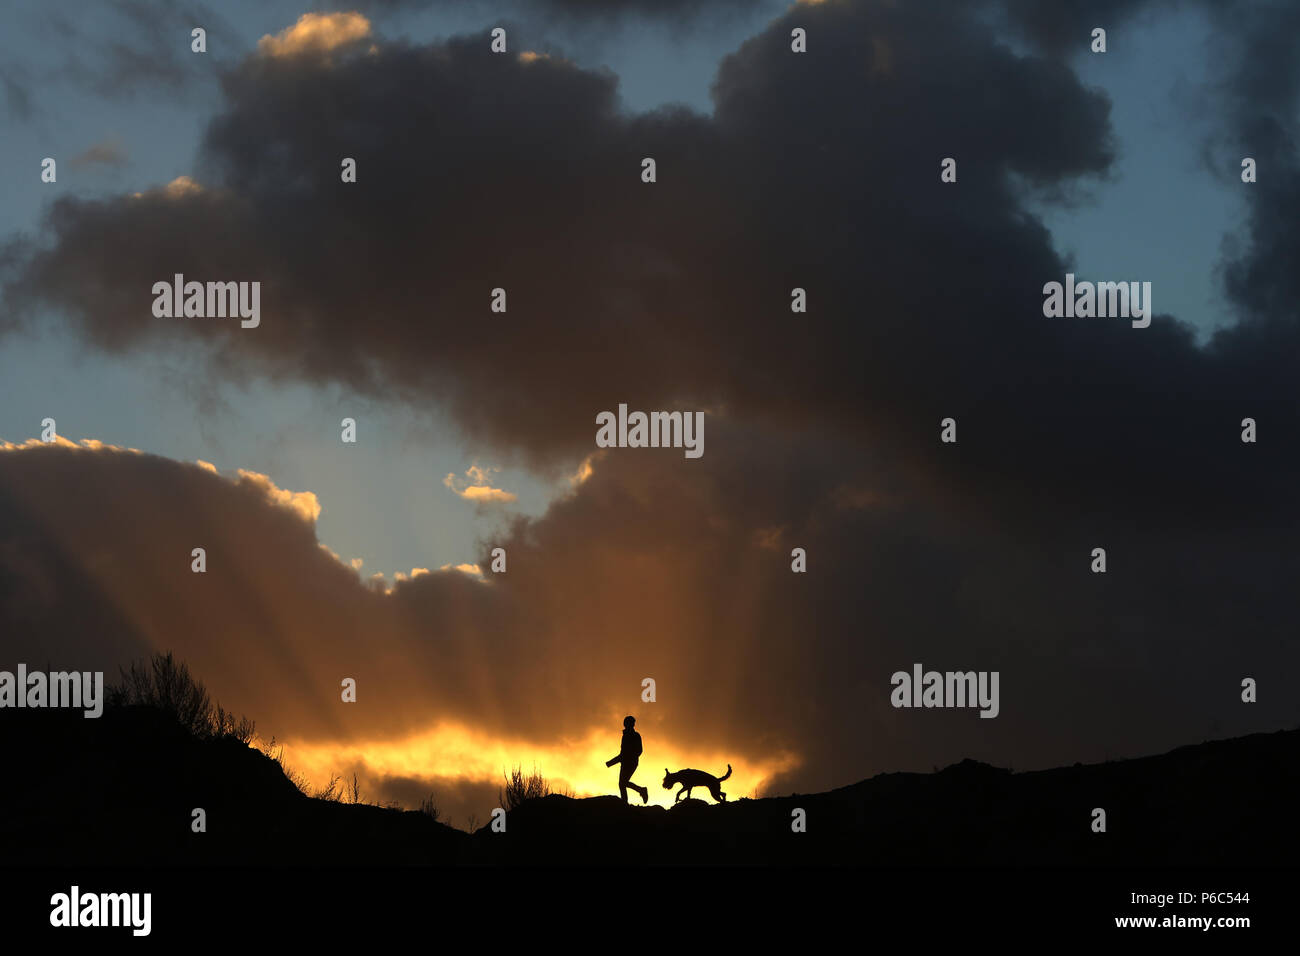 Wustrow, Germany - silhouette, boy runs at sunset with his dog over a dune Stock Photo